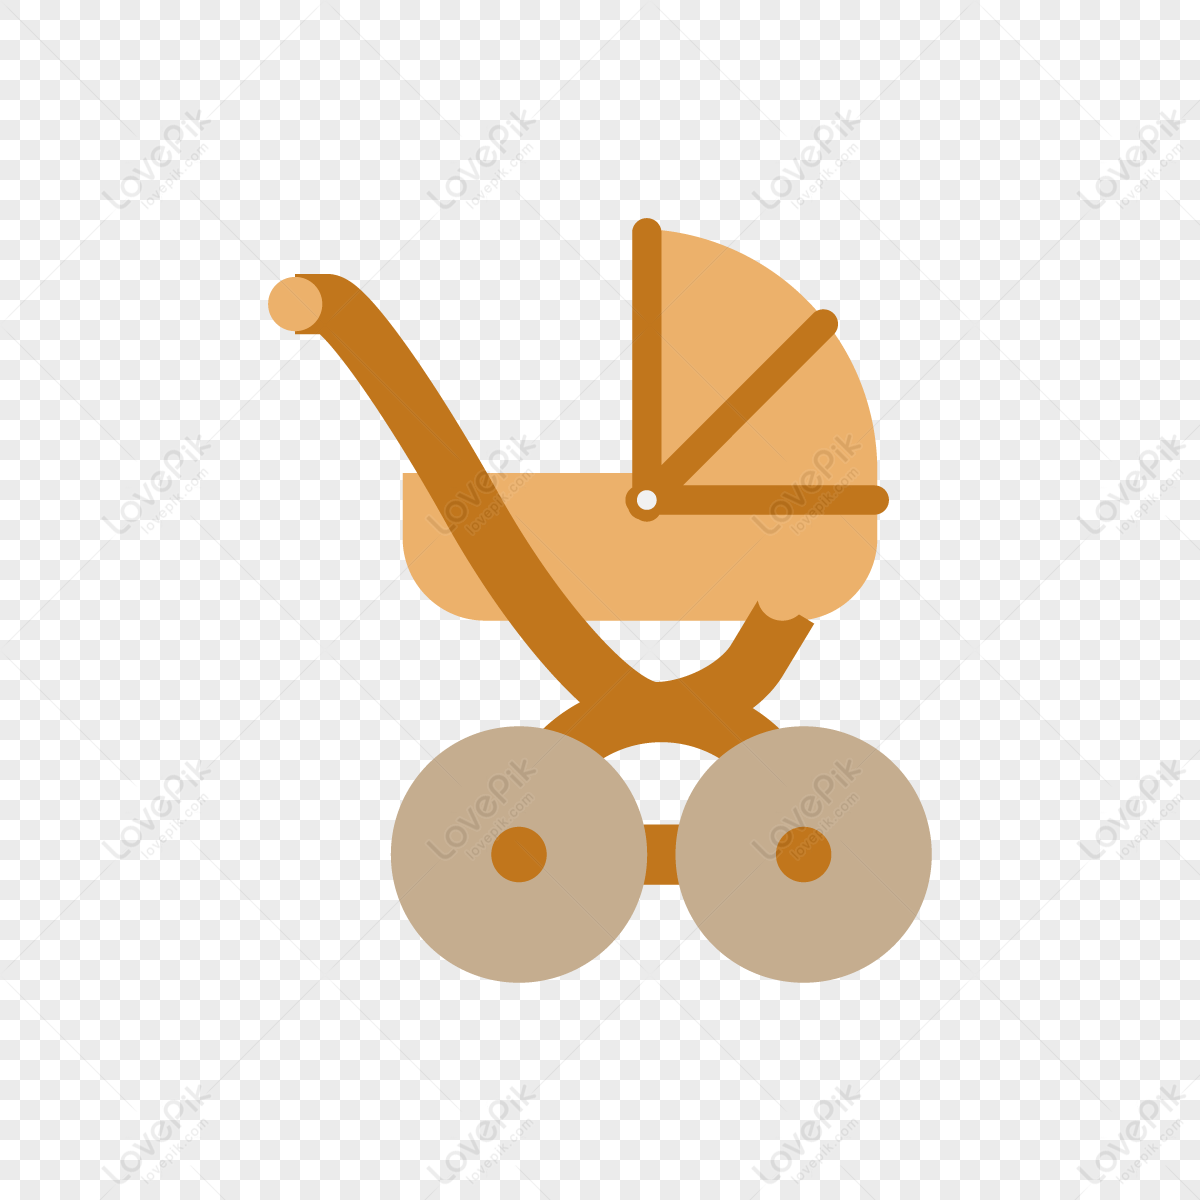 Baby Carriage PNG Transparent Image And Clipart Image For Free Download -  Lovepik | 400177297